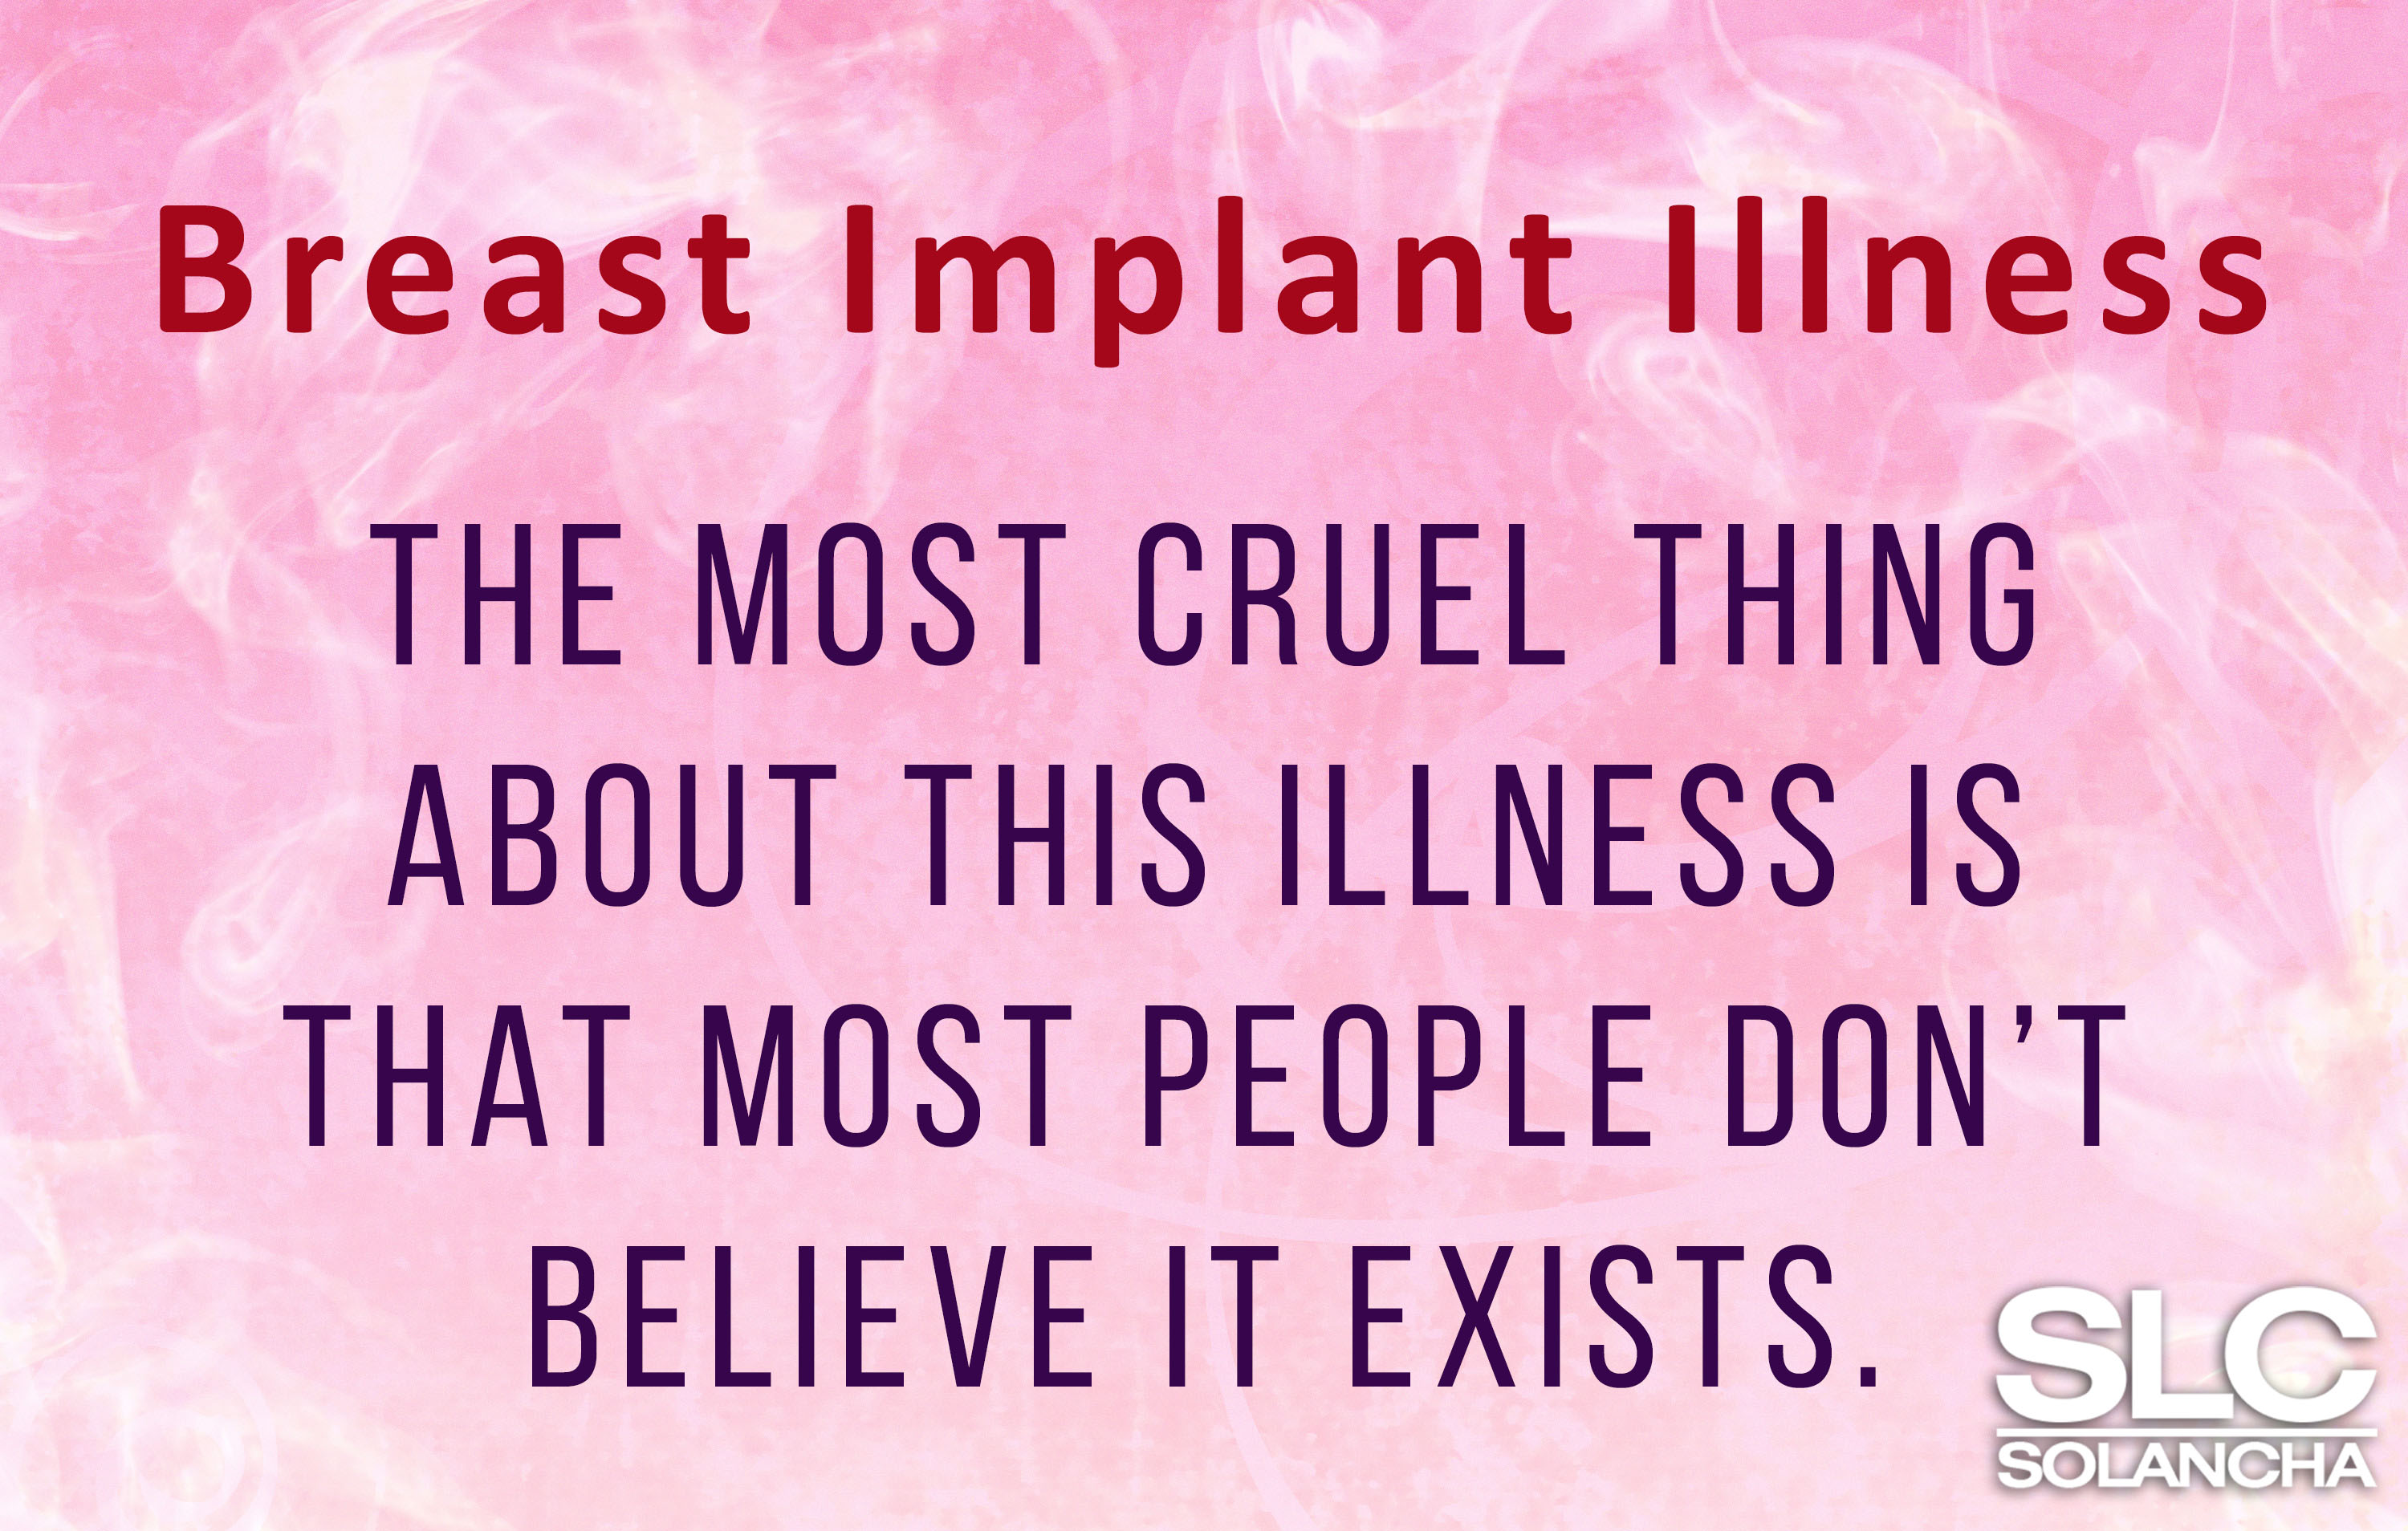 explant surgery quote image